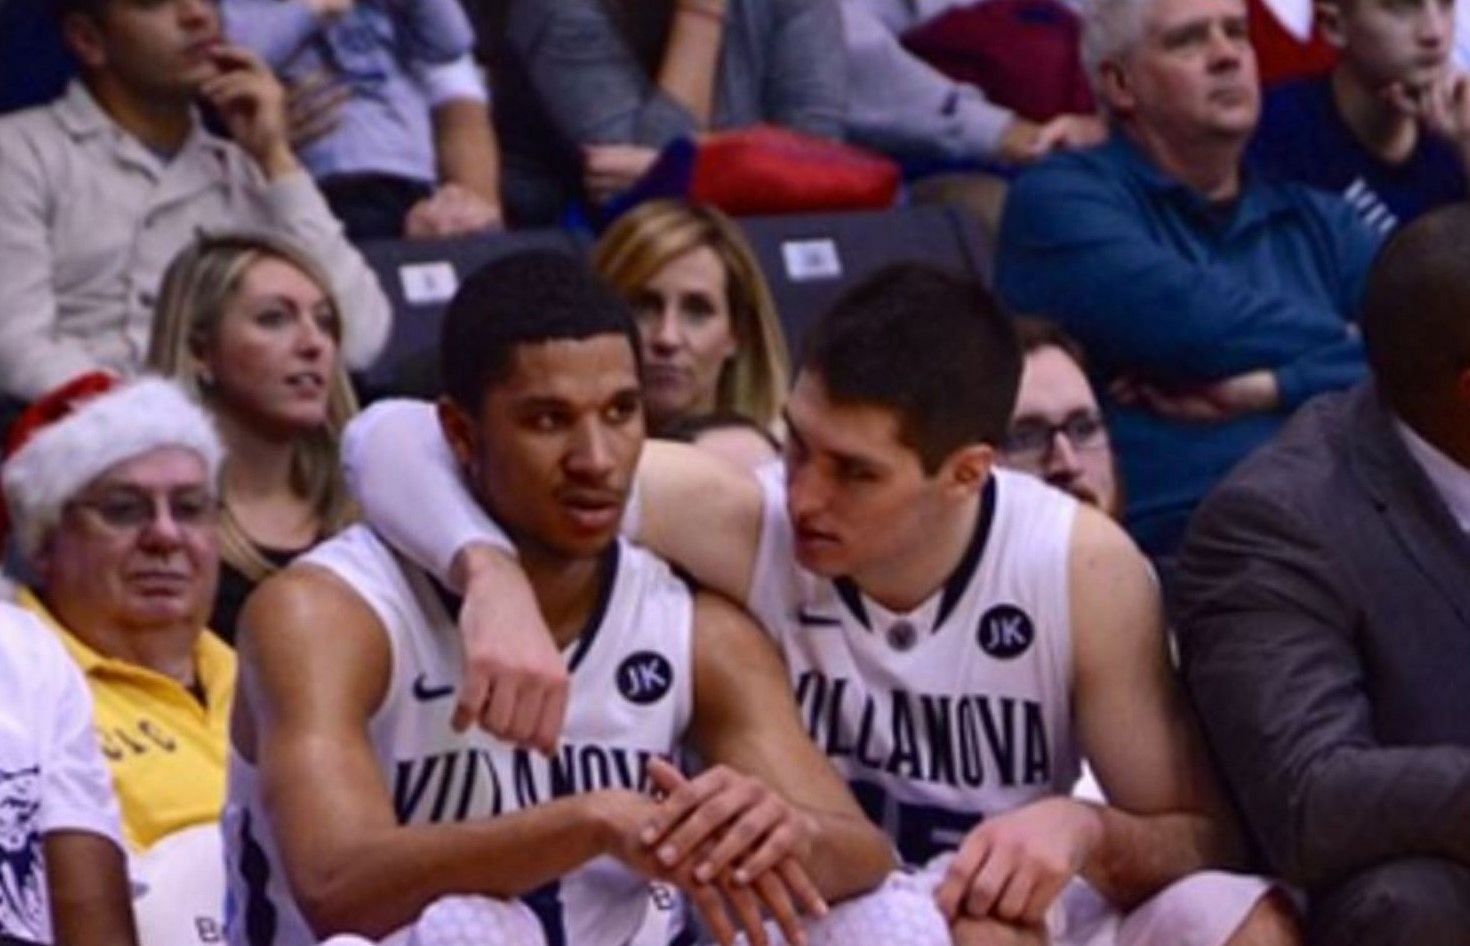 Ryan Arcidiacono (L) made fun of Villanova and New York Knicks teammate Josh Hart (R) during the game of the Wildcats against St. John